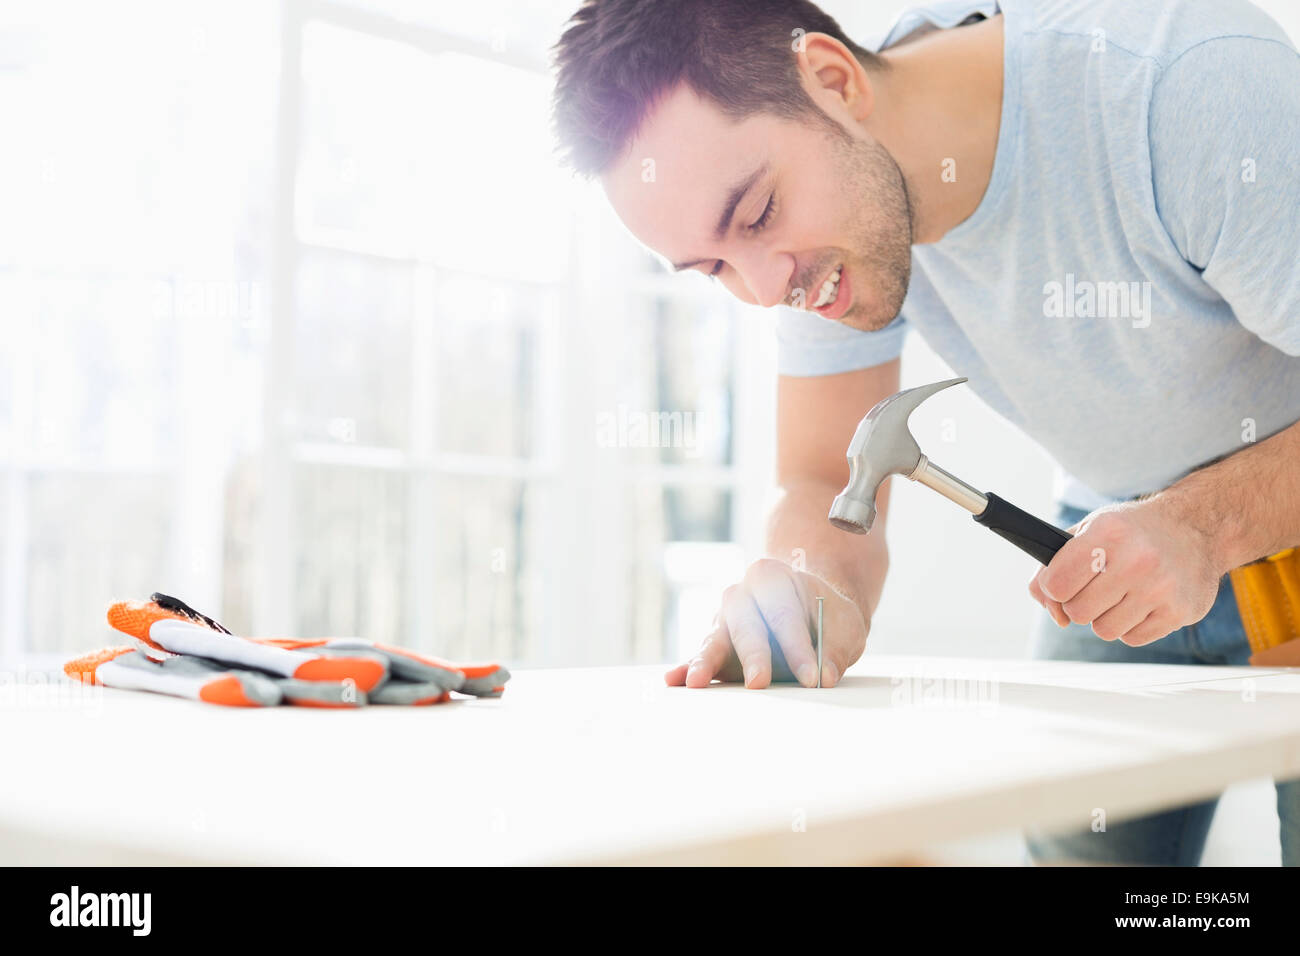 Mid-adult man nailing in table Stock Photo